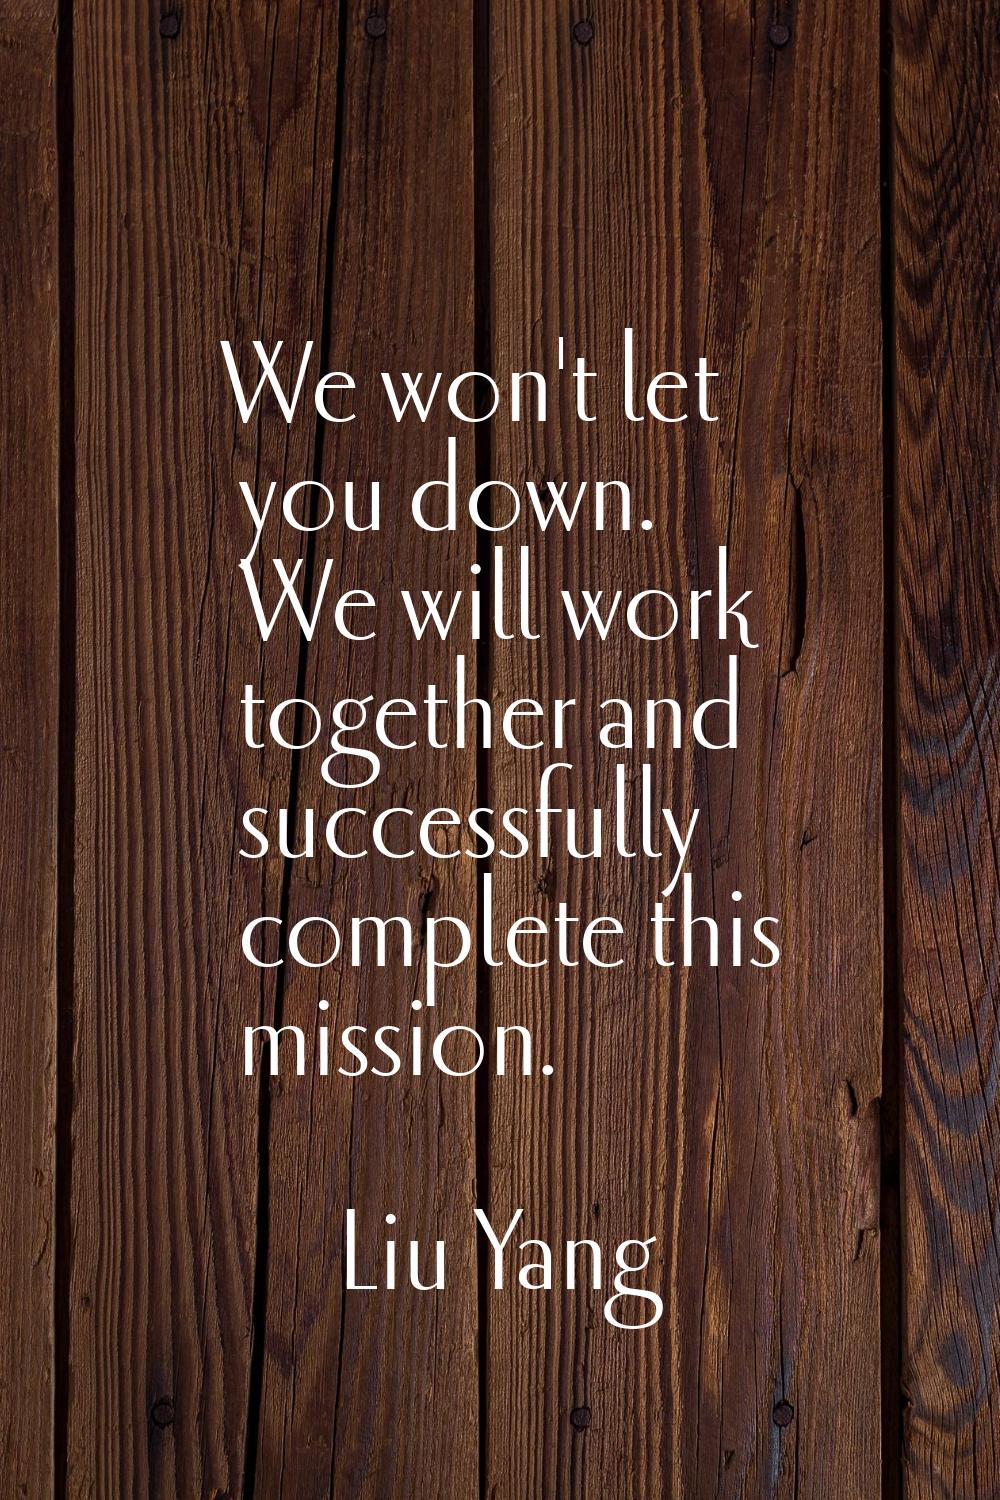 We won't let you down. We will work together and successfully complete this mission.